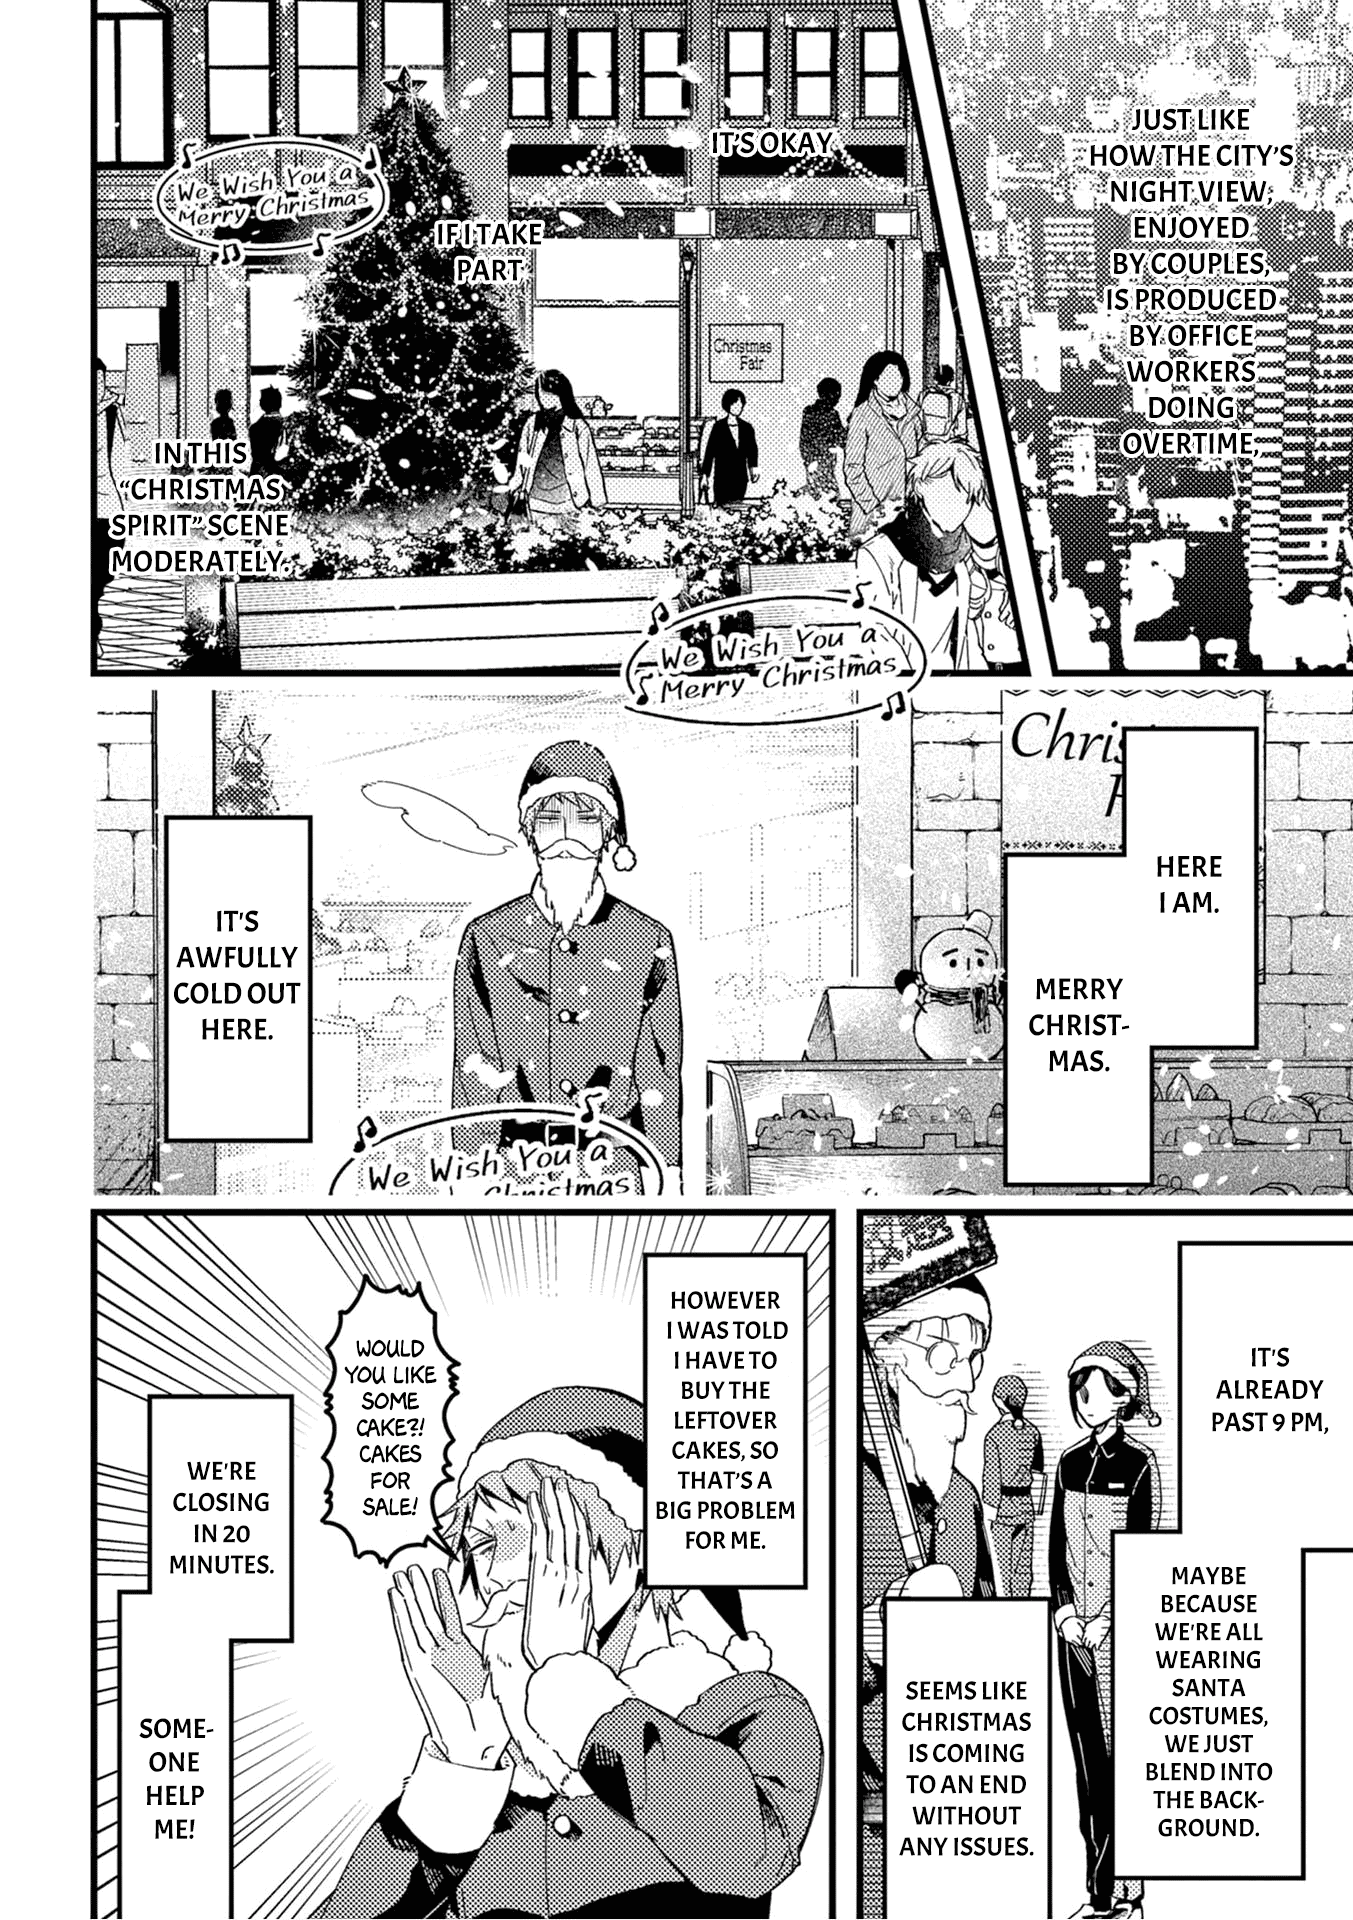 A World Where Everything Definitely Becomes Bl Vs. The Man Who Definitely Doesn't Want To Be In A Bl Vol.2 Chapter 25: Vs Christmas - Picture 3